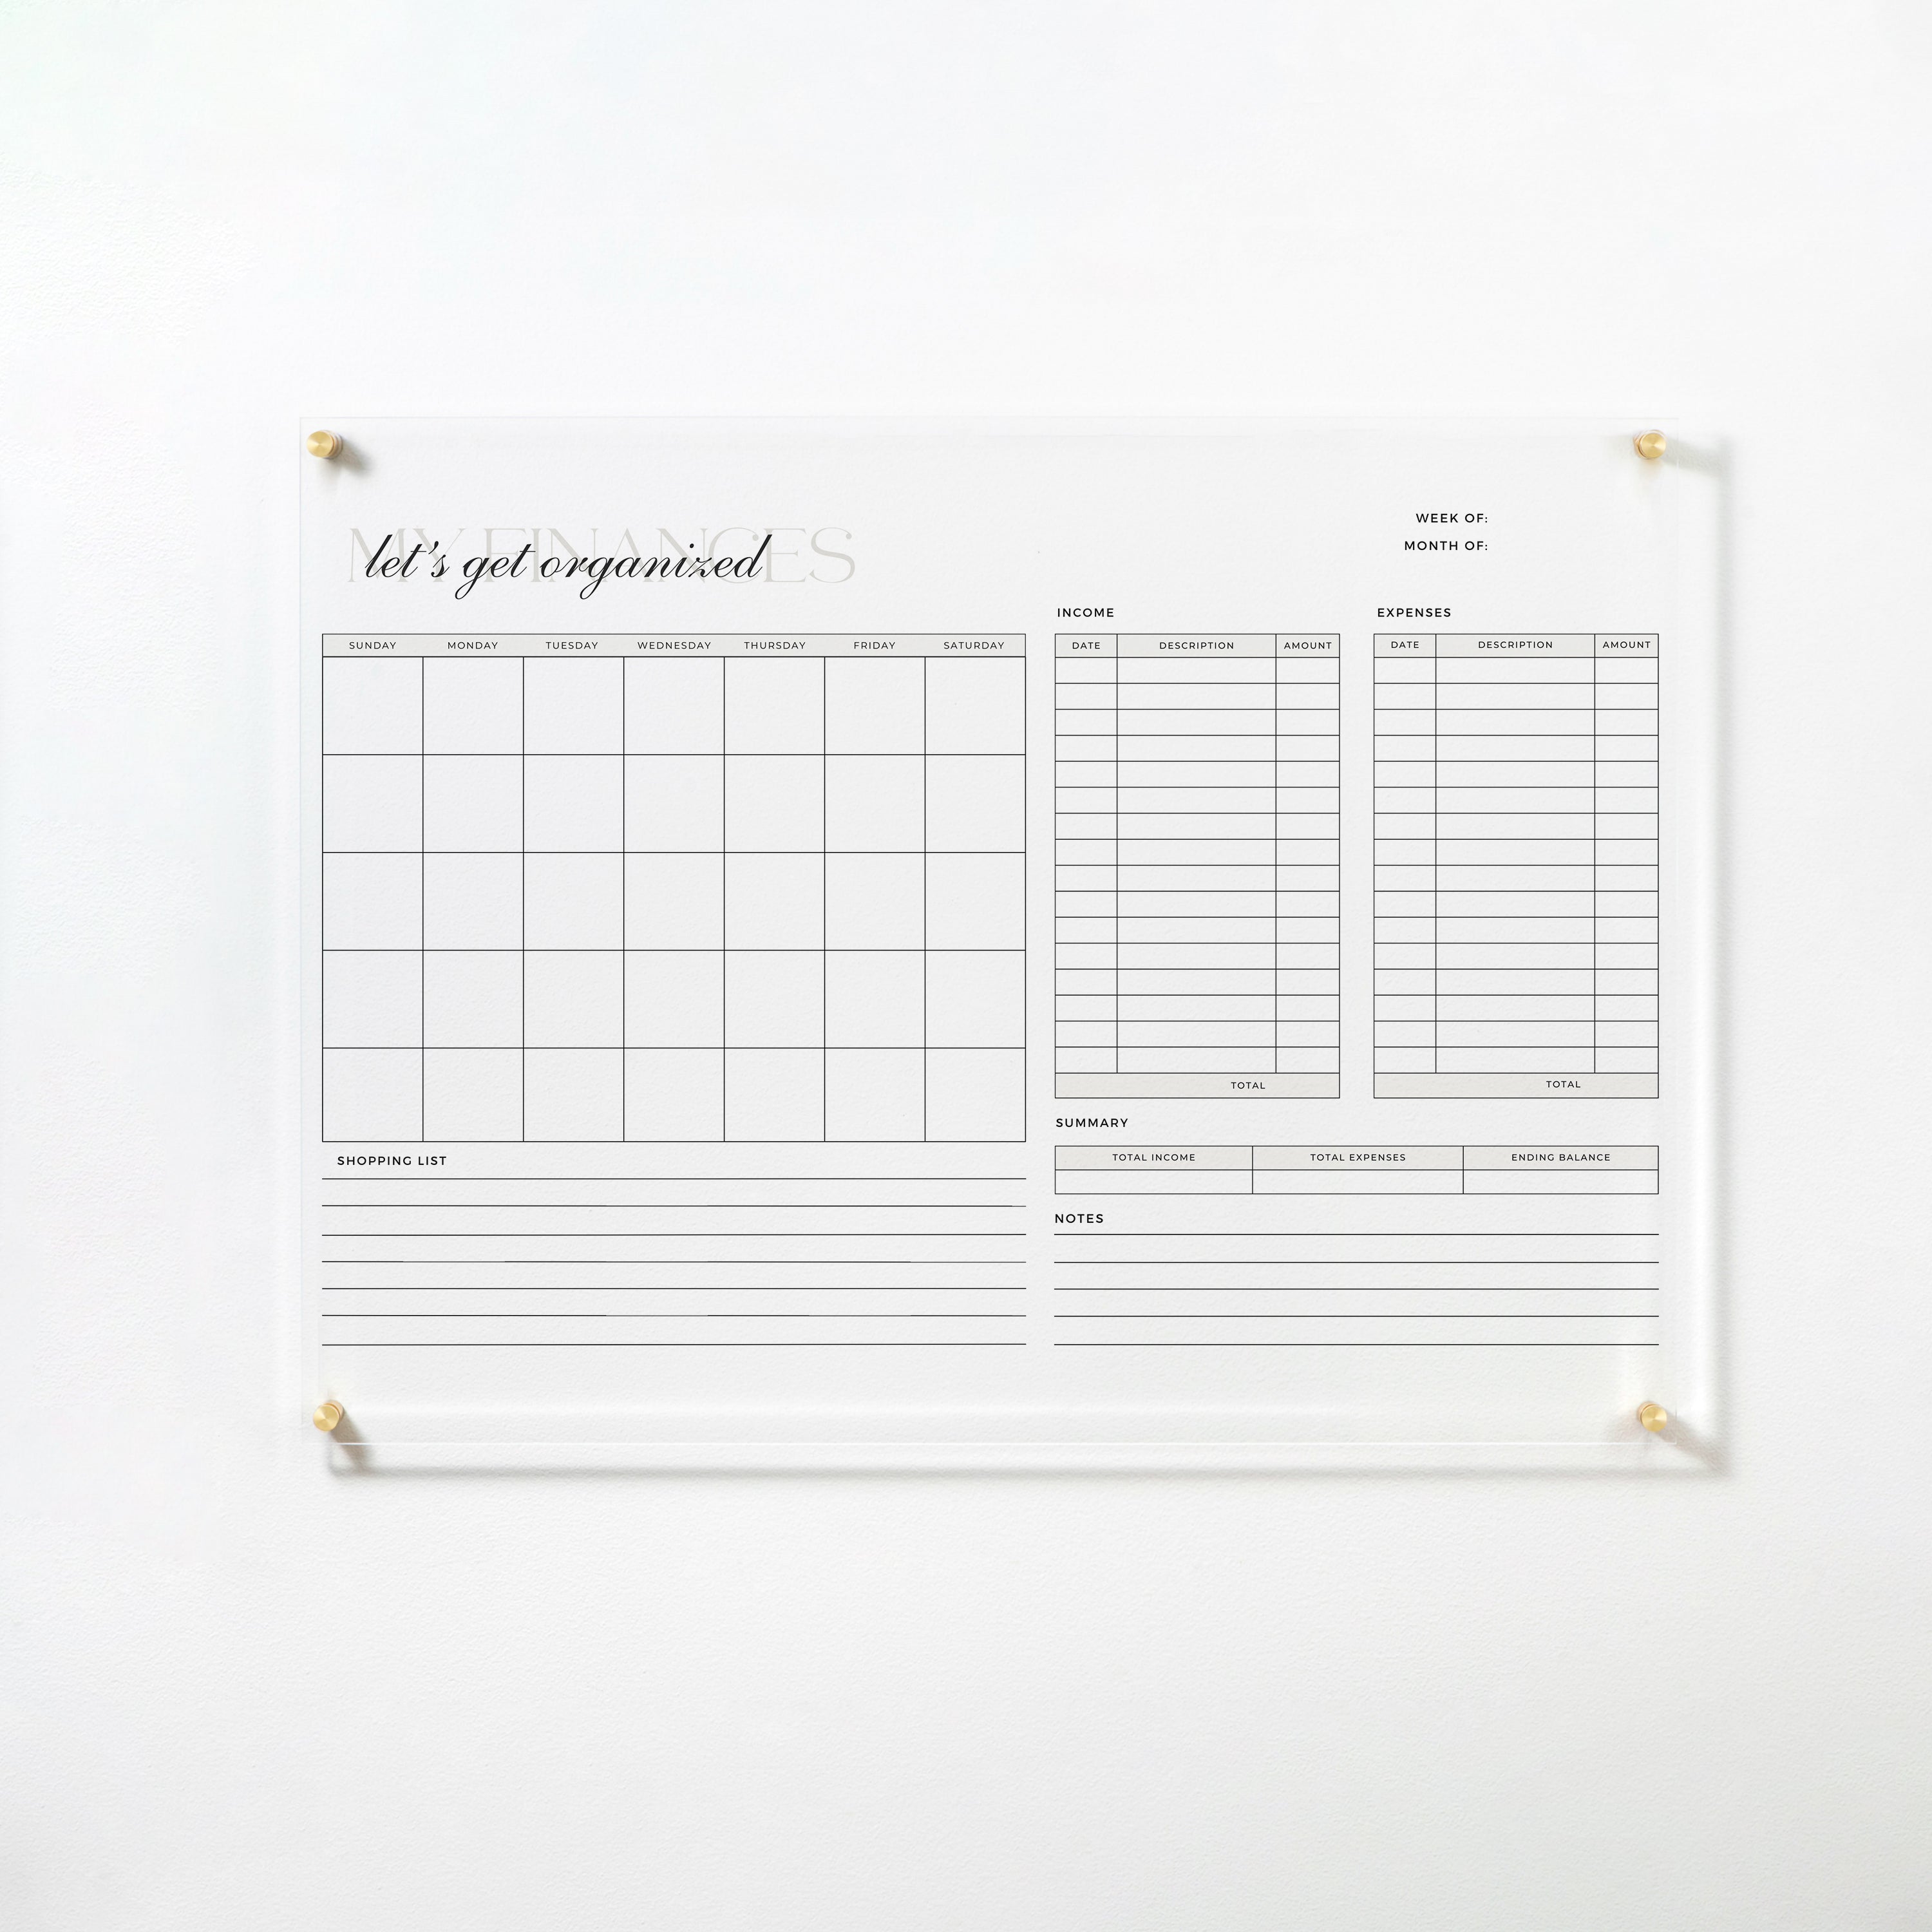 The full view of the same acrylic board, mounted on a white wall with gold pins. The board includes a monthly calendar, columns for income and expenses, a summary section, shopping list, and notes area, making it an ideal tool for financial organization.